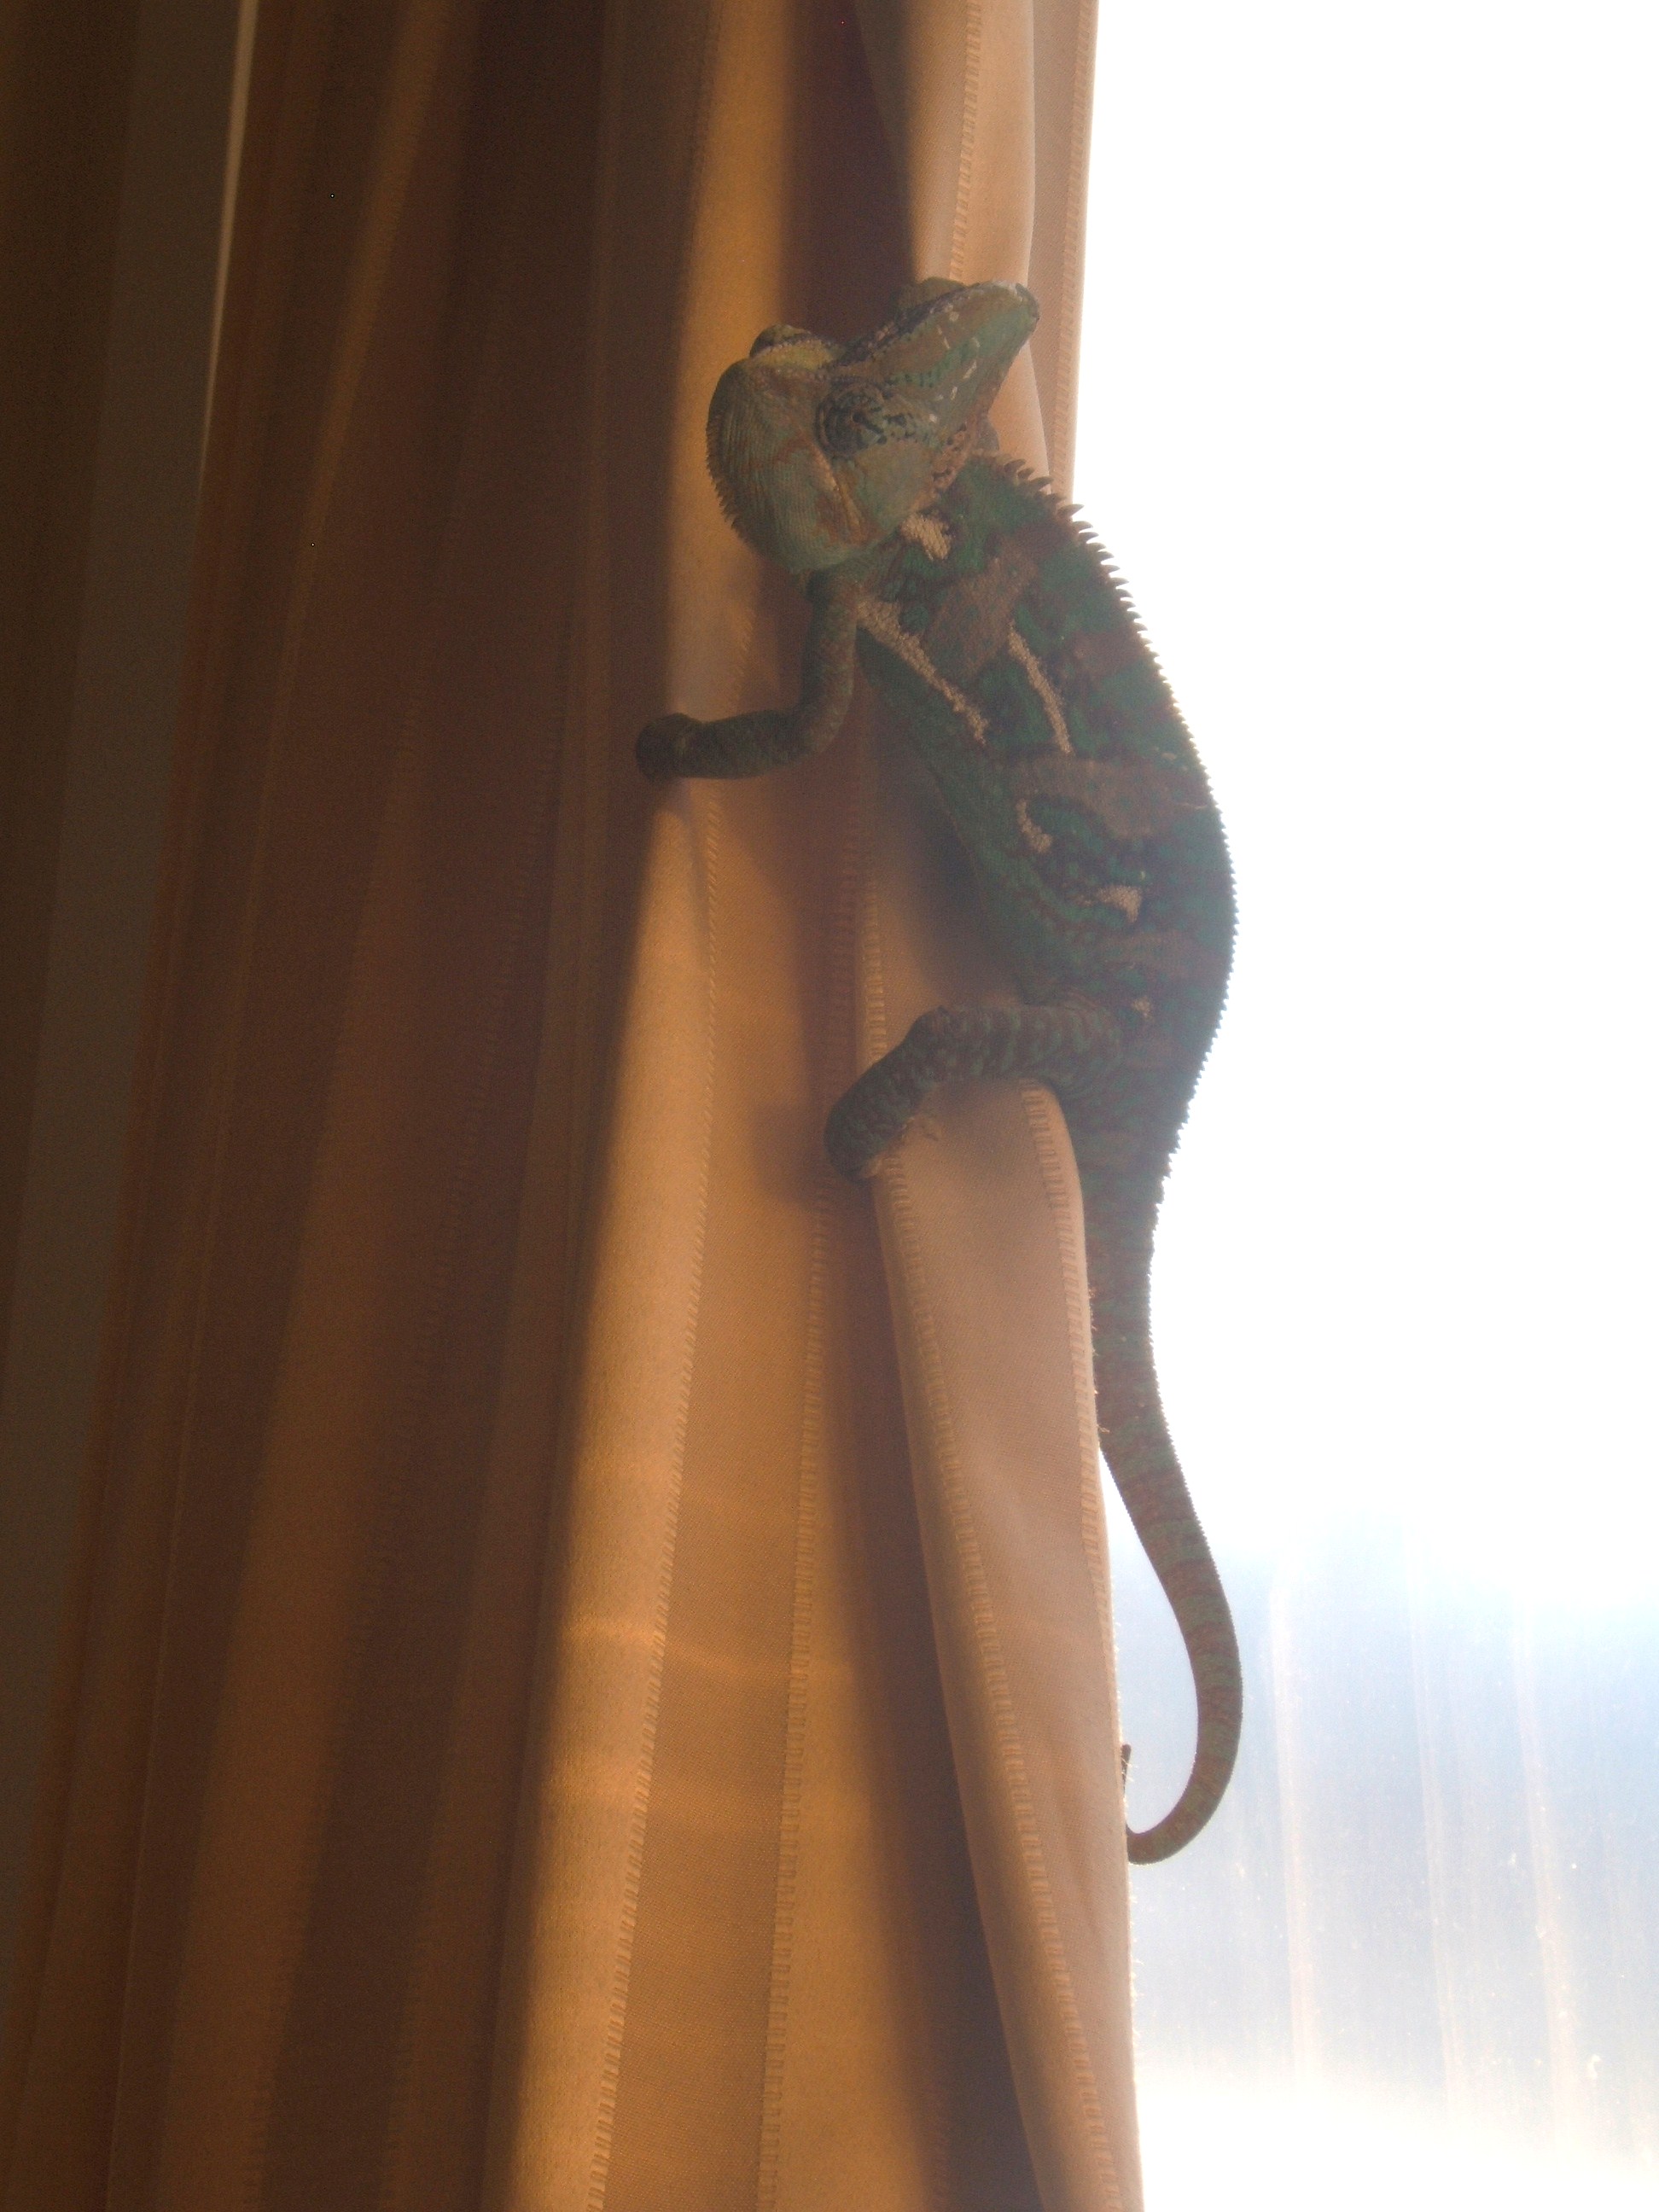 Hangin On The Curtain